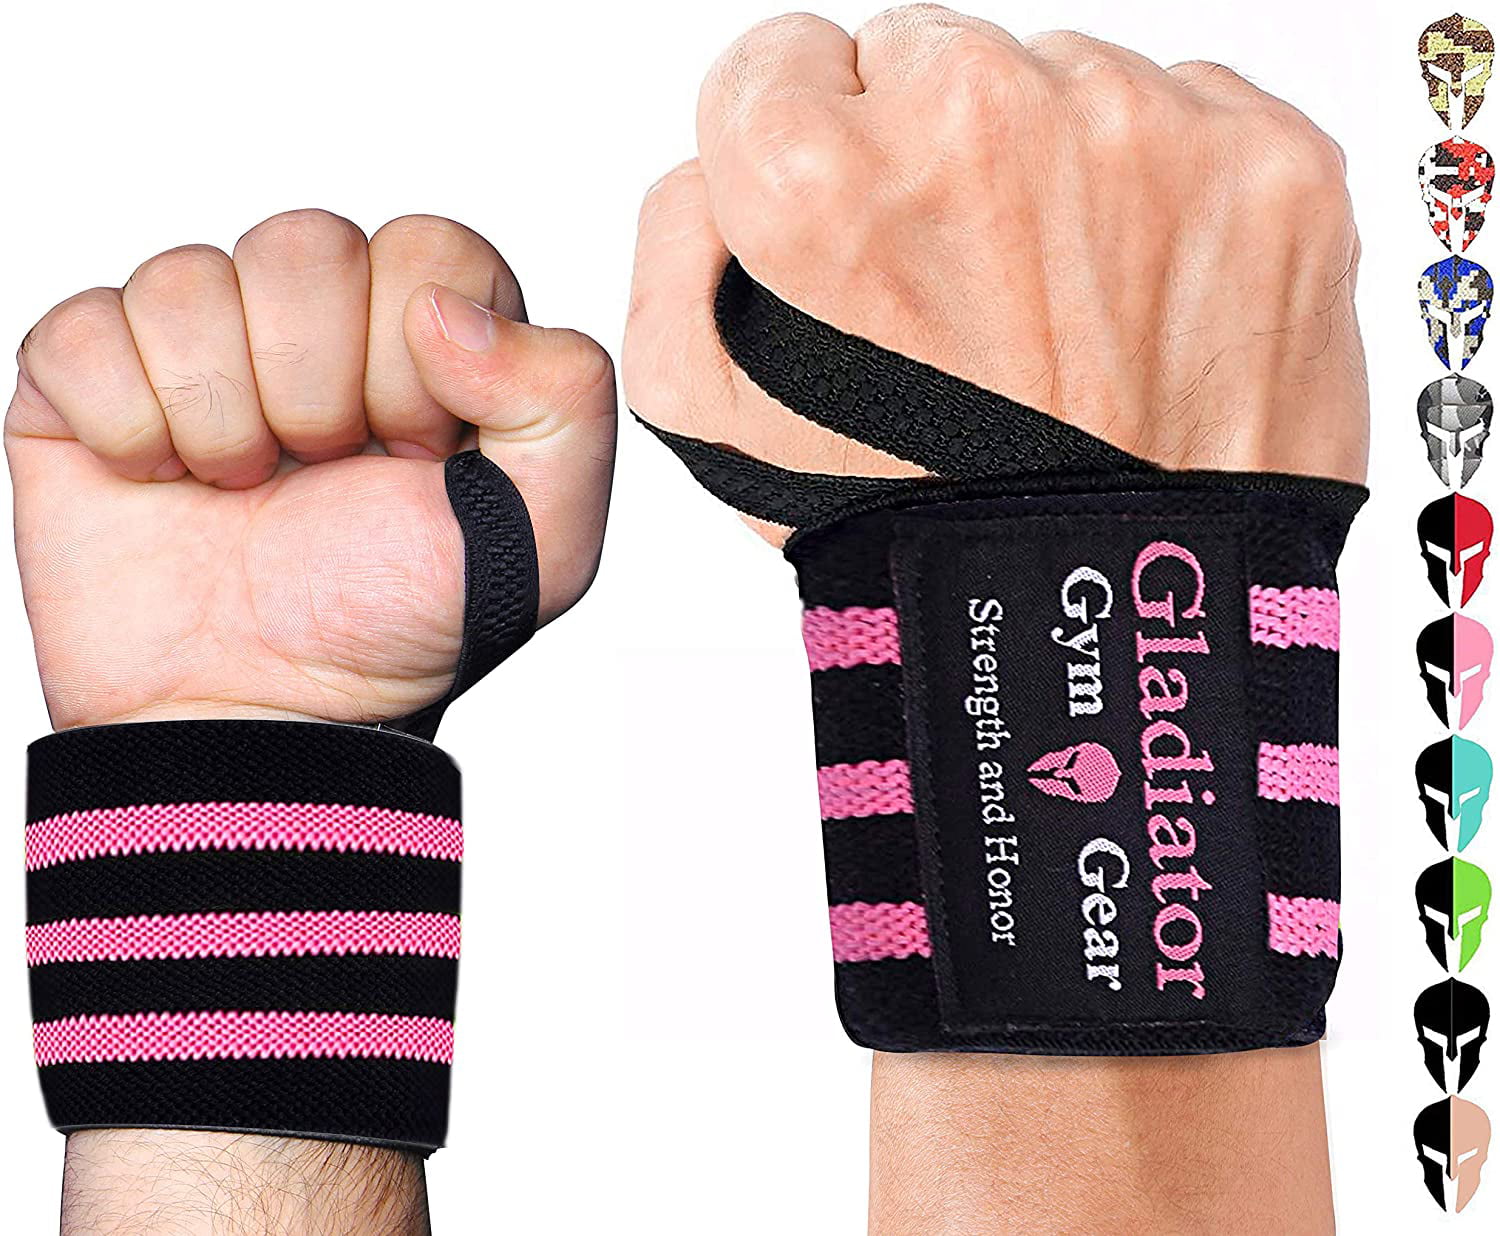 NEW Power Wrist Wraps Powerlifting Weight Lifting Training Support BLACK/WHITE 